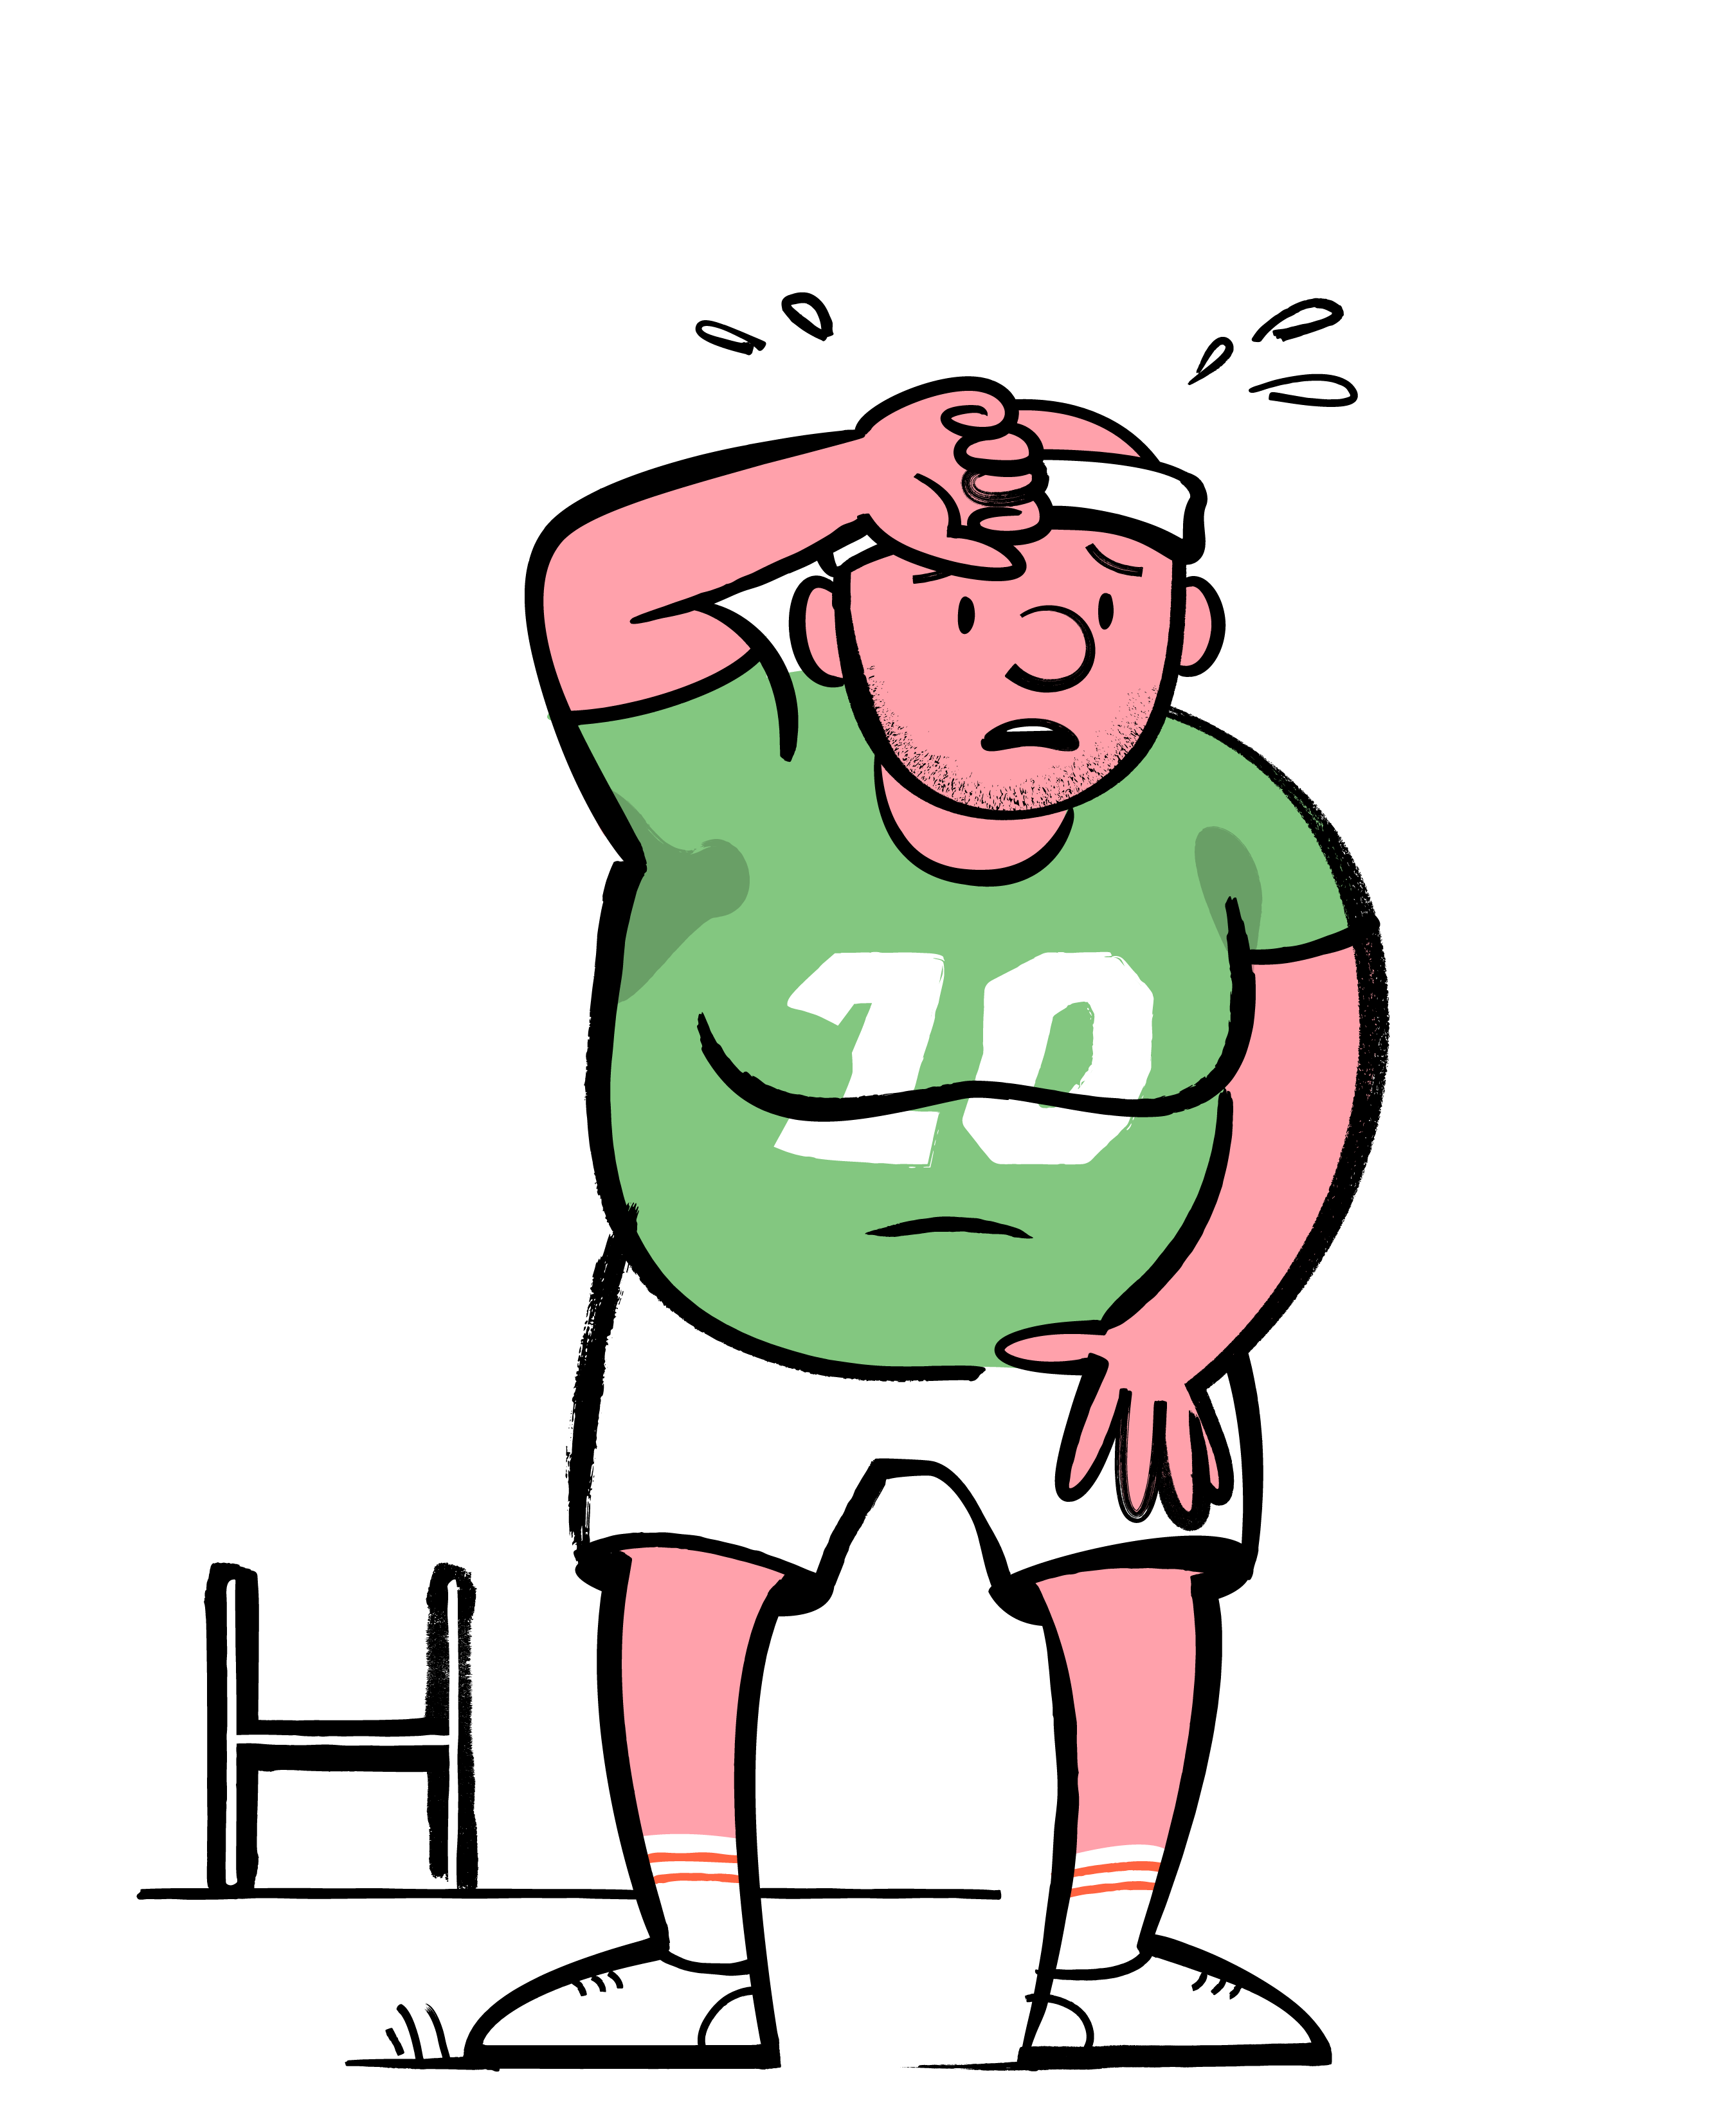 Illustration of a man working out and sweating